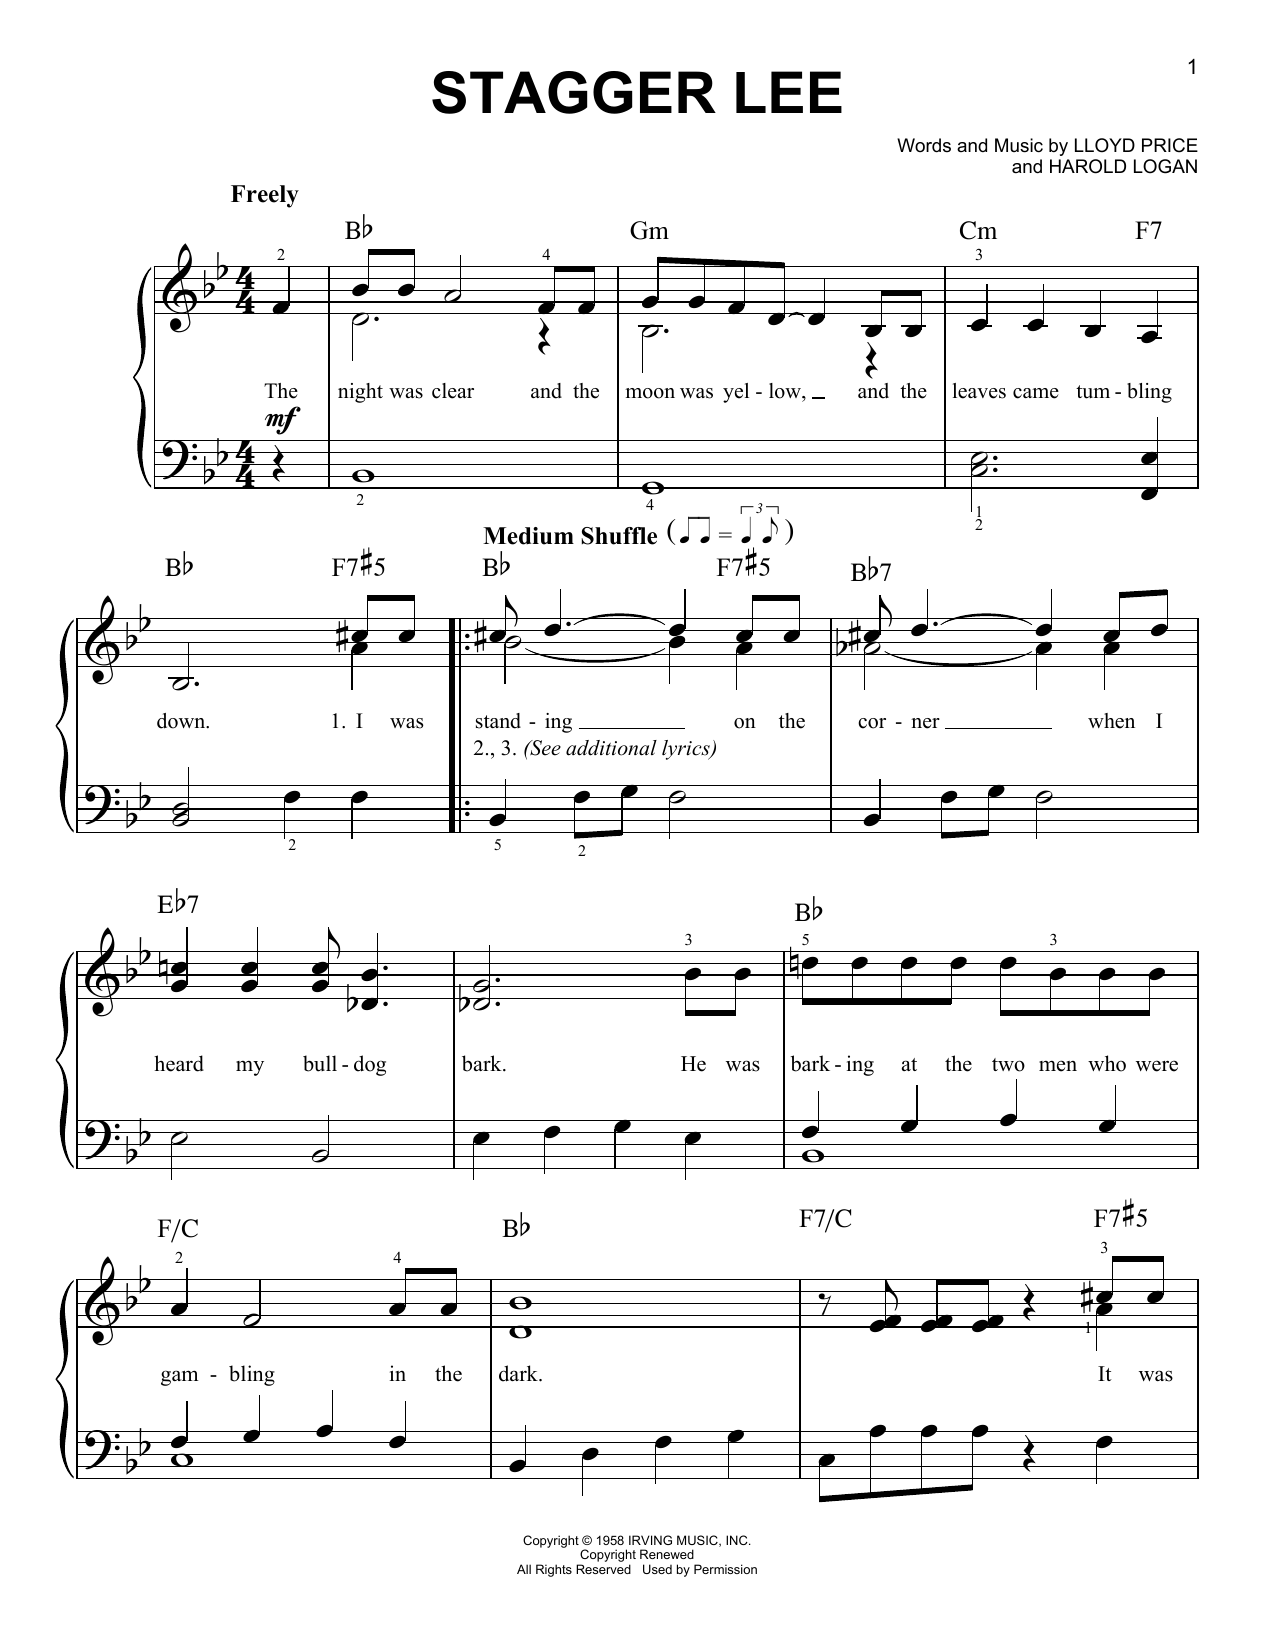 Download Lloyd Price Stagger Lee Sheet Music